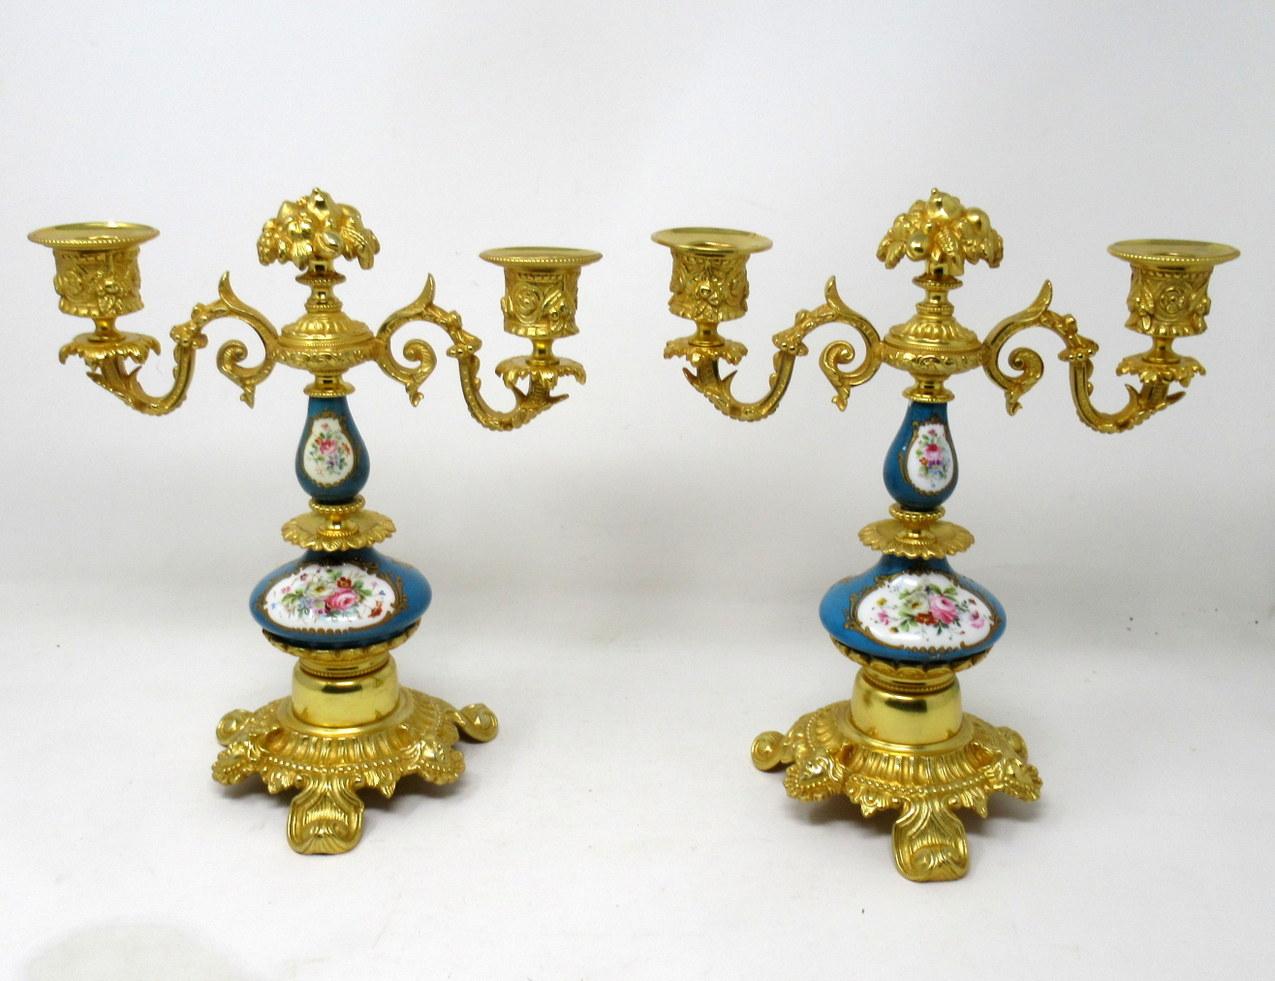 Late Victorian Pair of French Ormolu Gilt Bronze Sevres Porcelain Candelabras, 19th Century